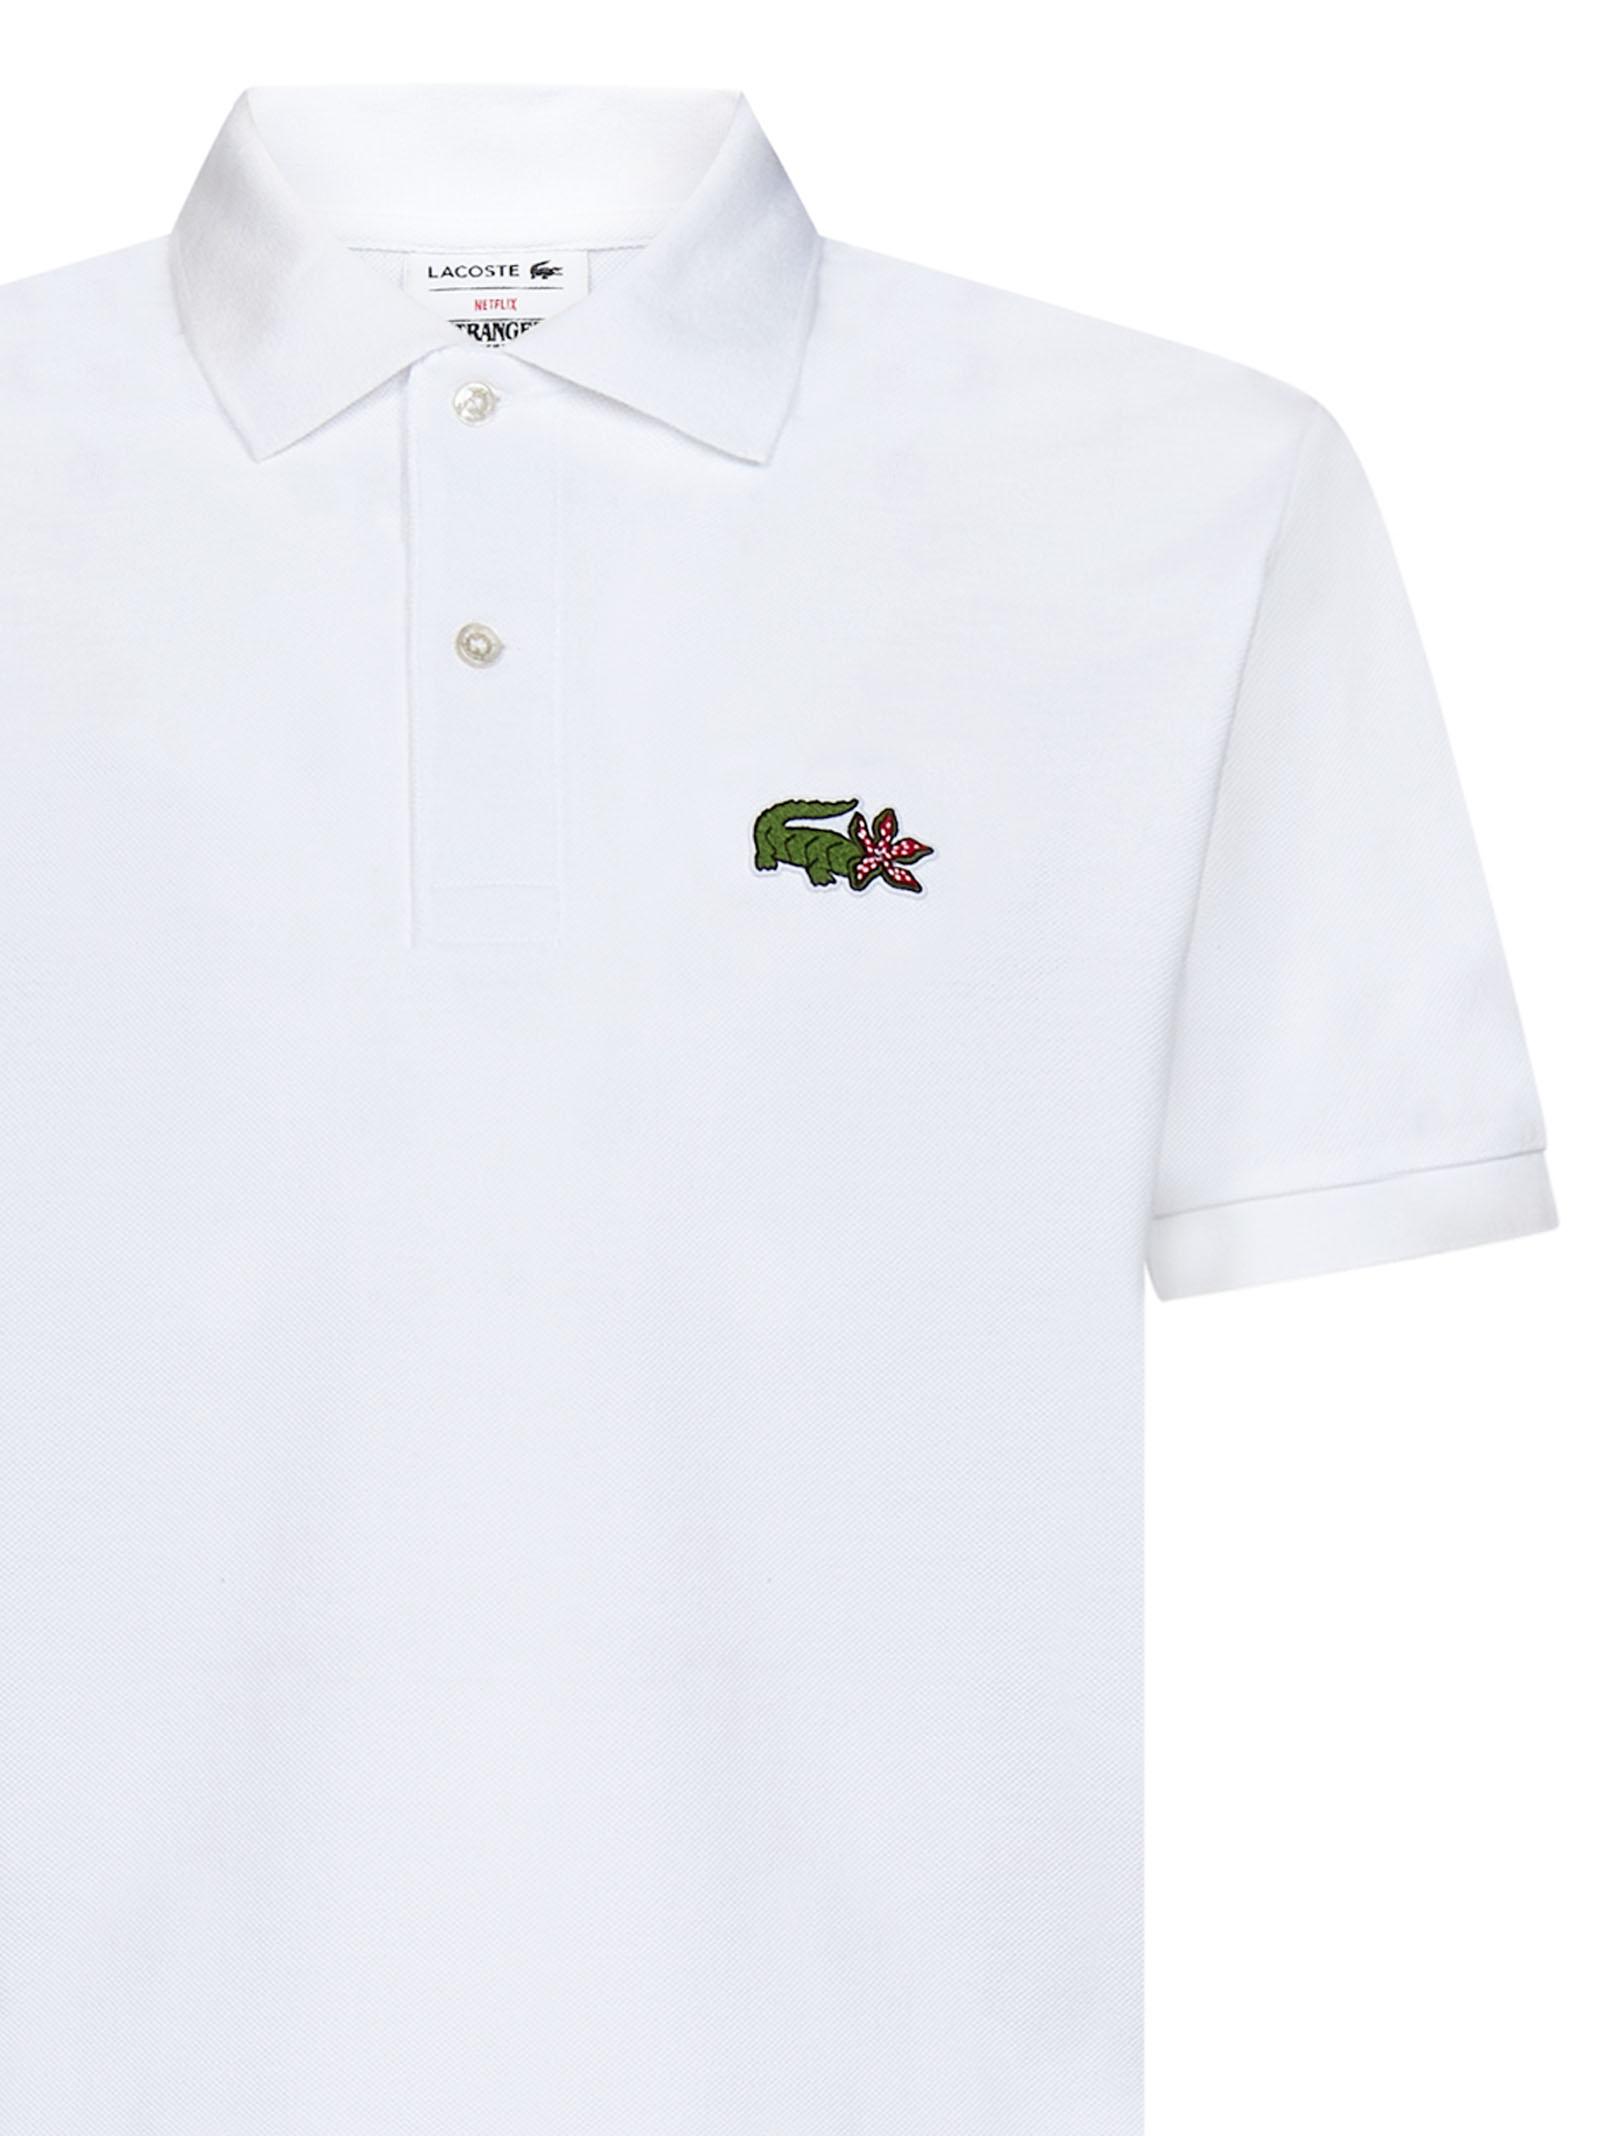 Lacoste X Netflix Polo Shirt in White for Men | Lyst